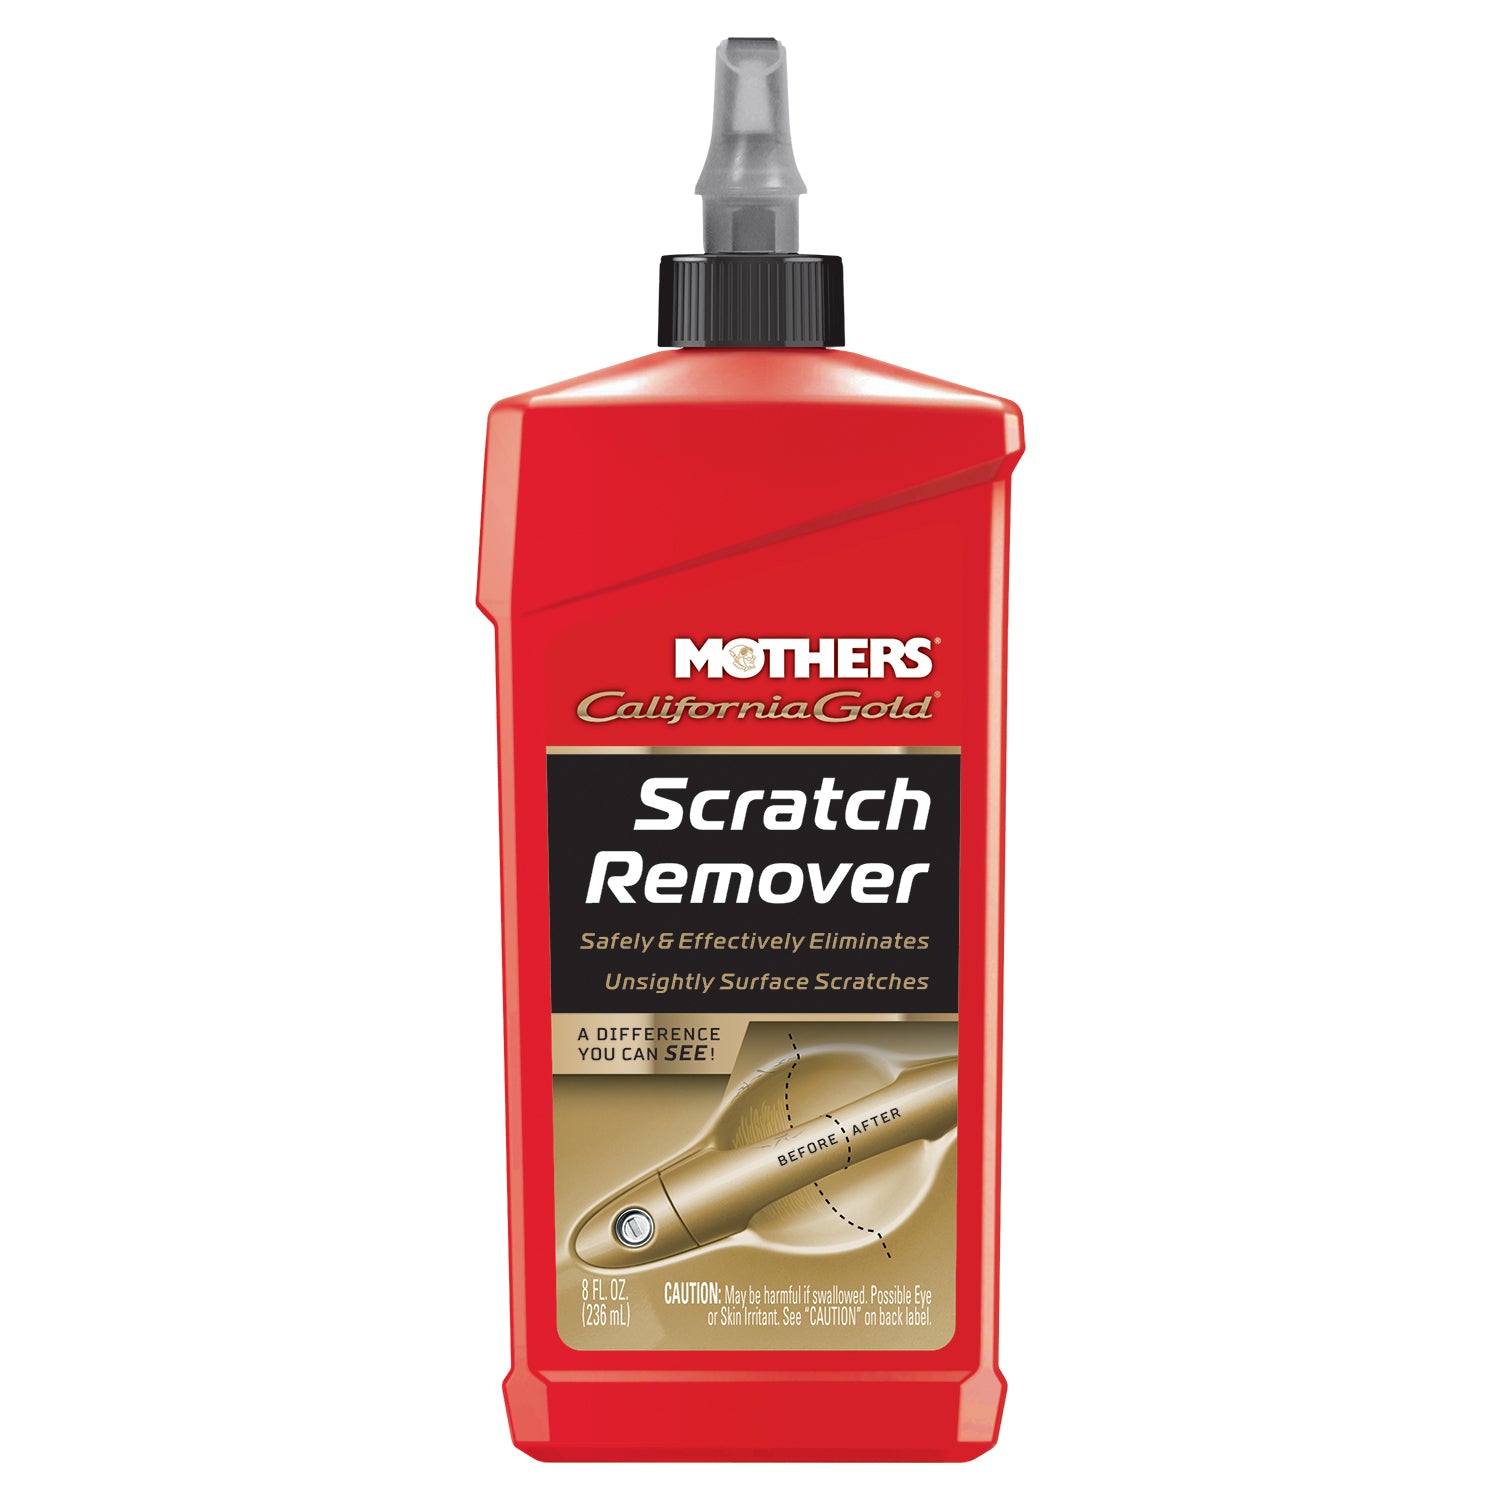 Mothers California Gold Scratch Remover 8 oz.